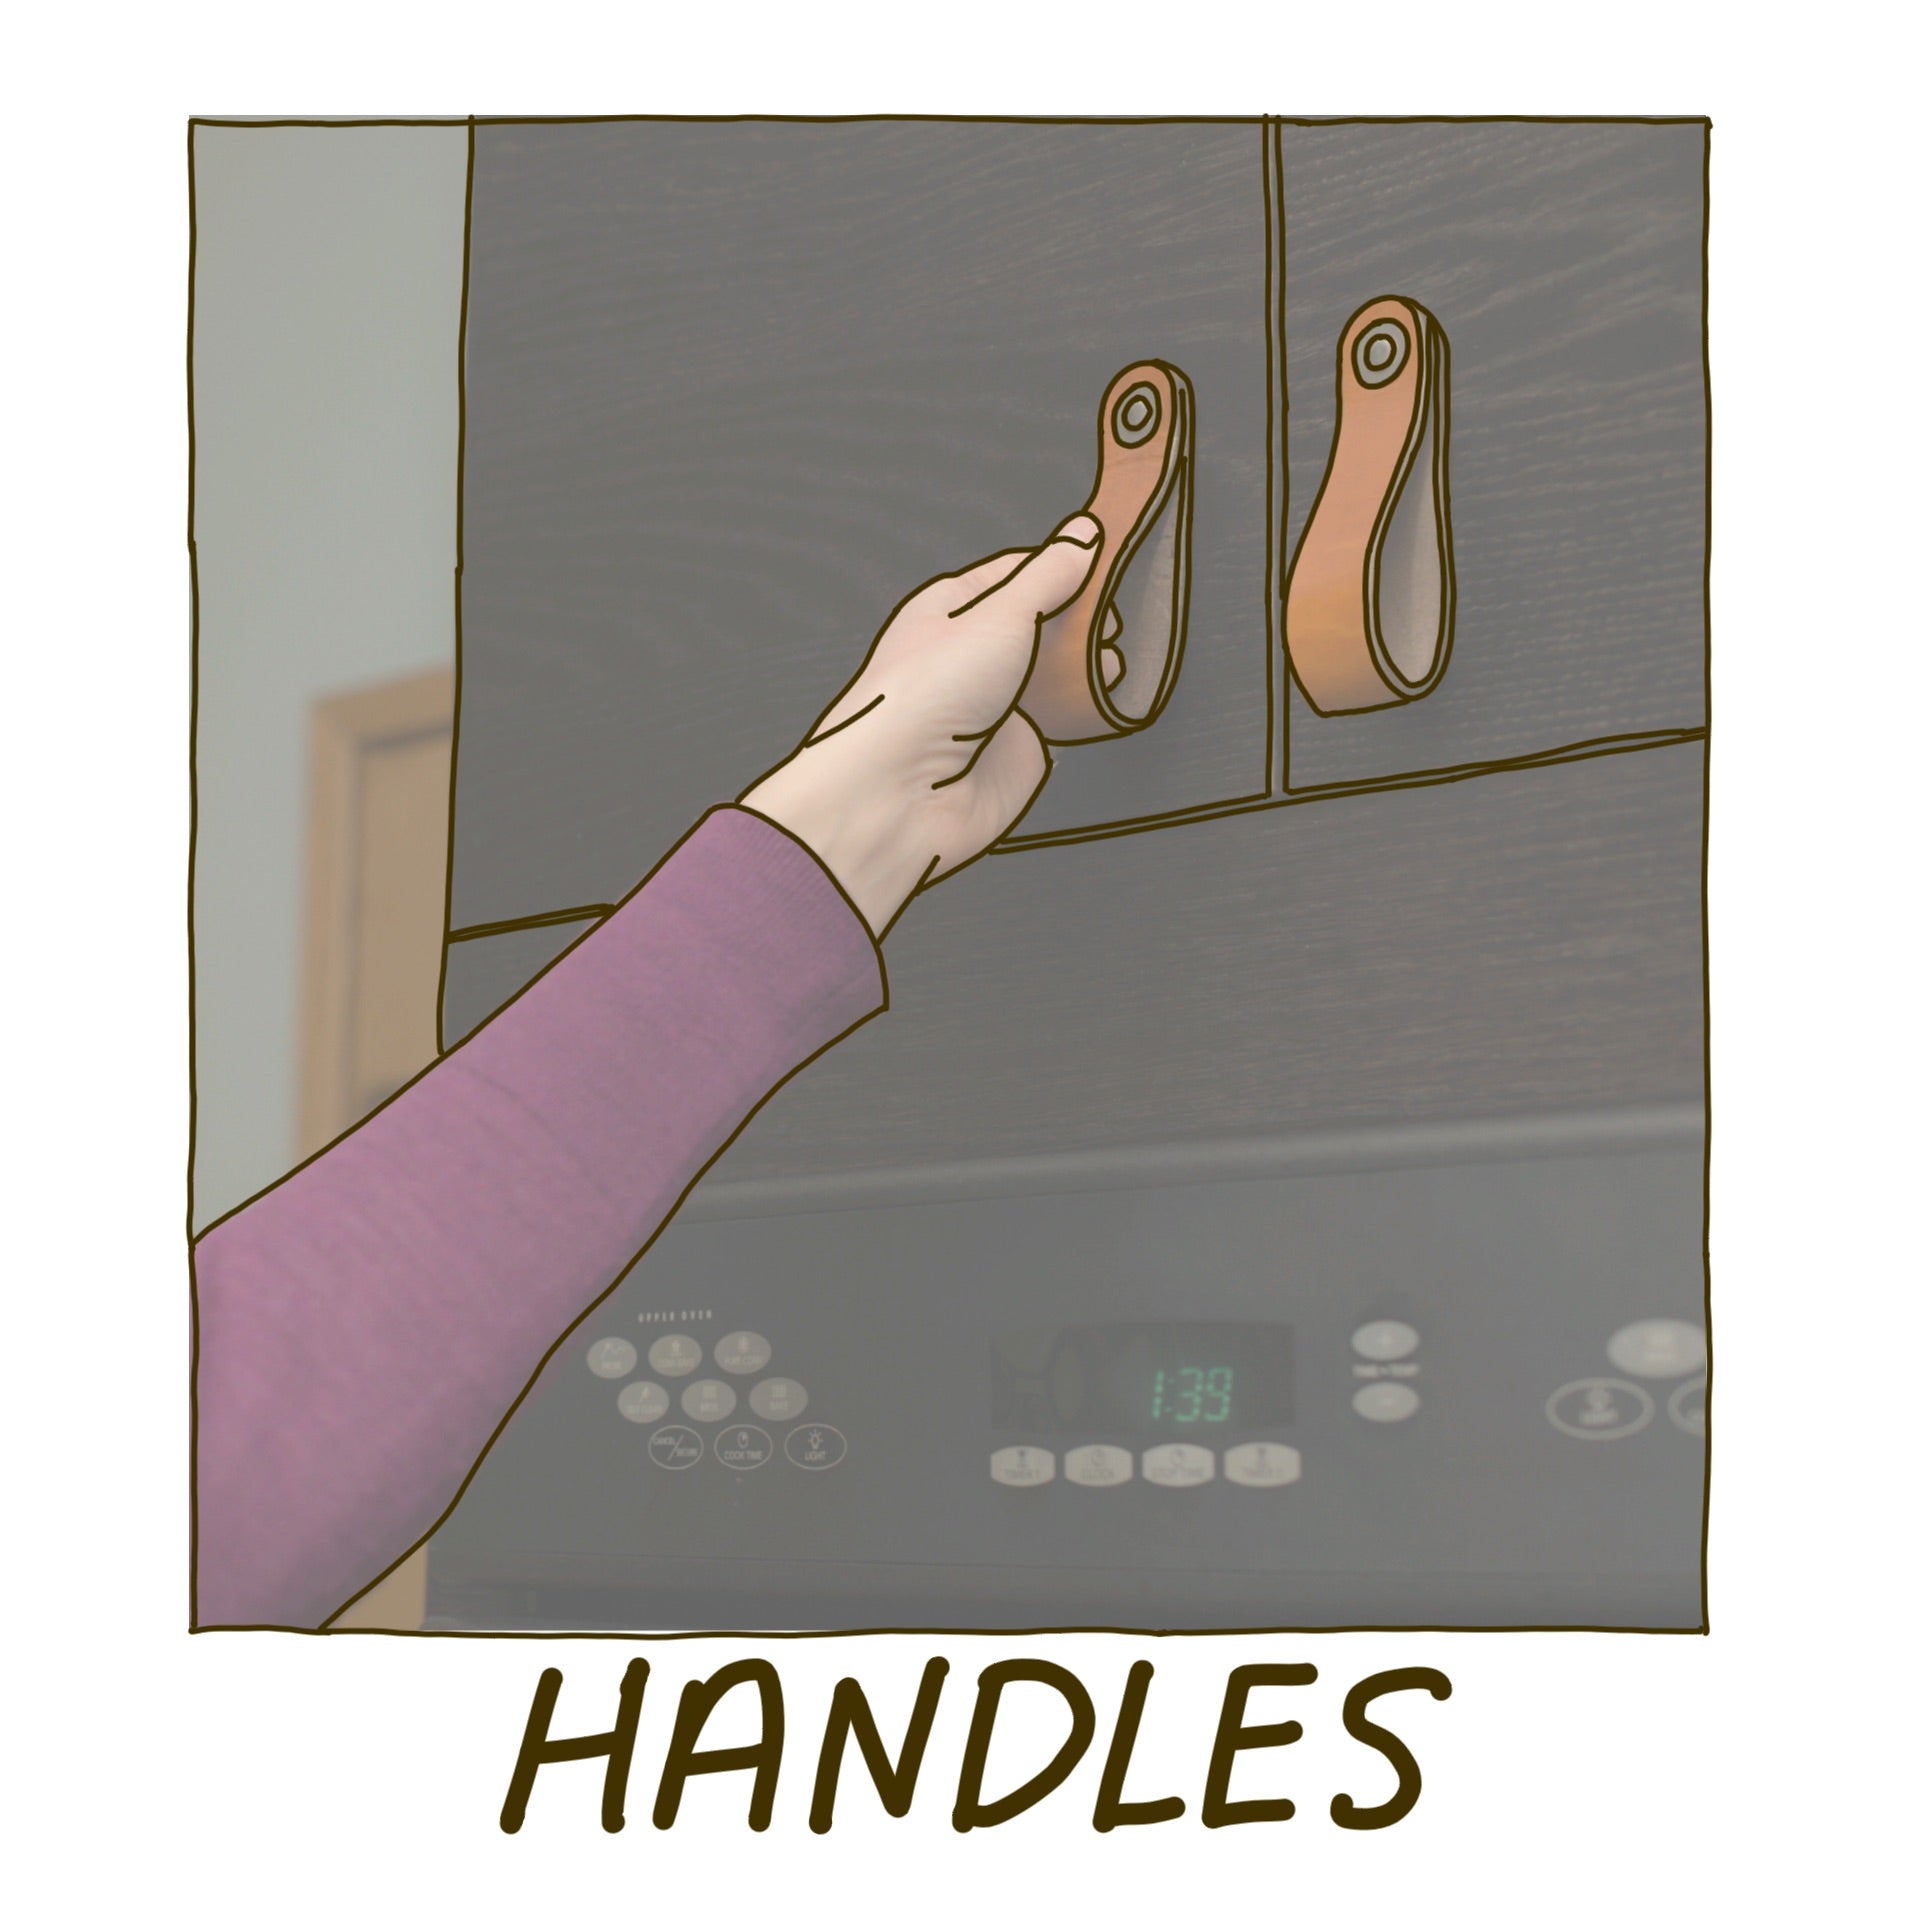 A person's hand reaching up to a honey leather handle on an upper kitchen cabinet made of dark wood by IKEA, with the word "Handles" underneath